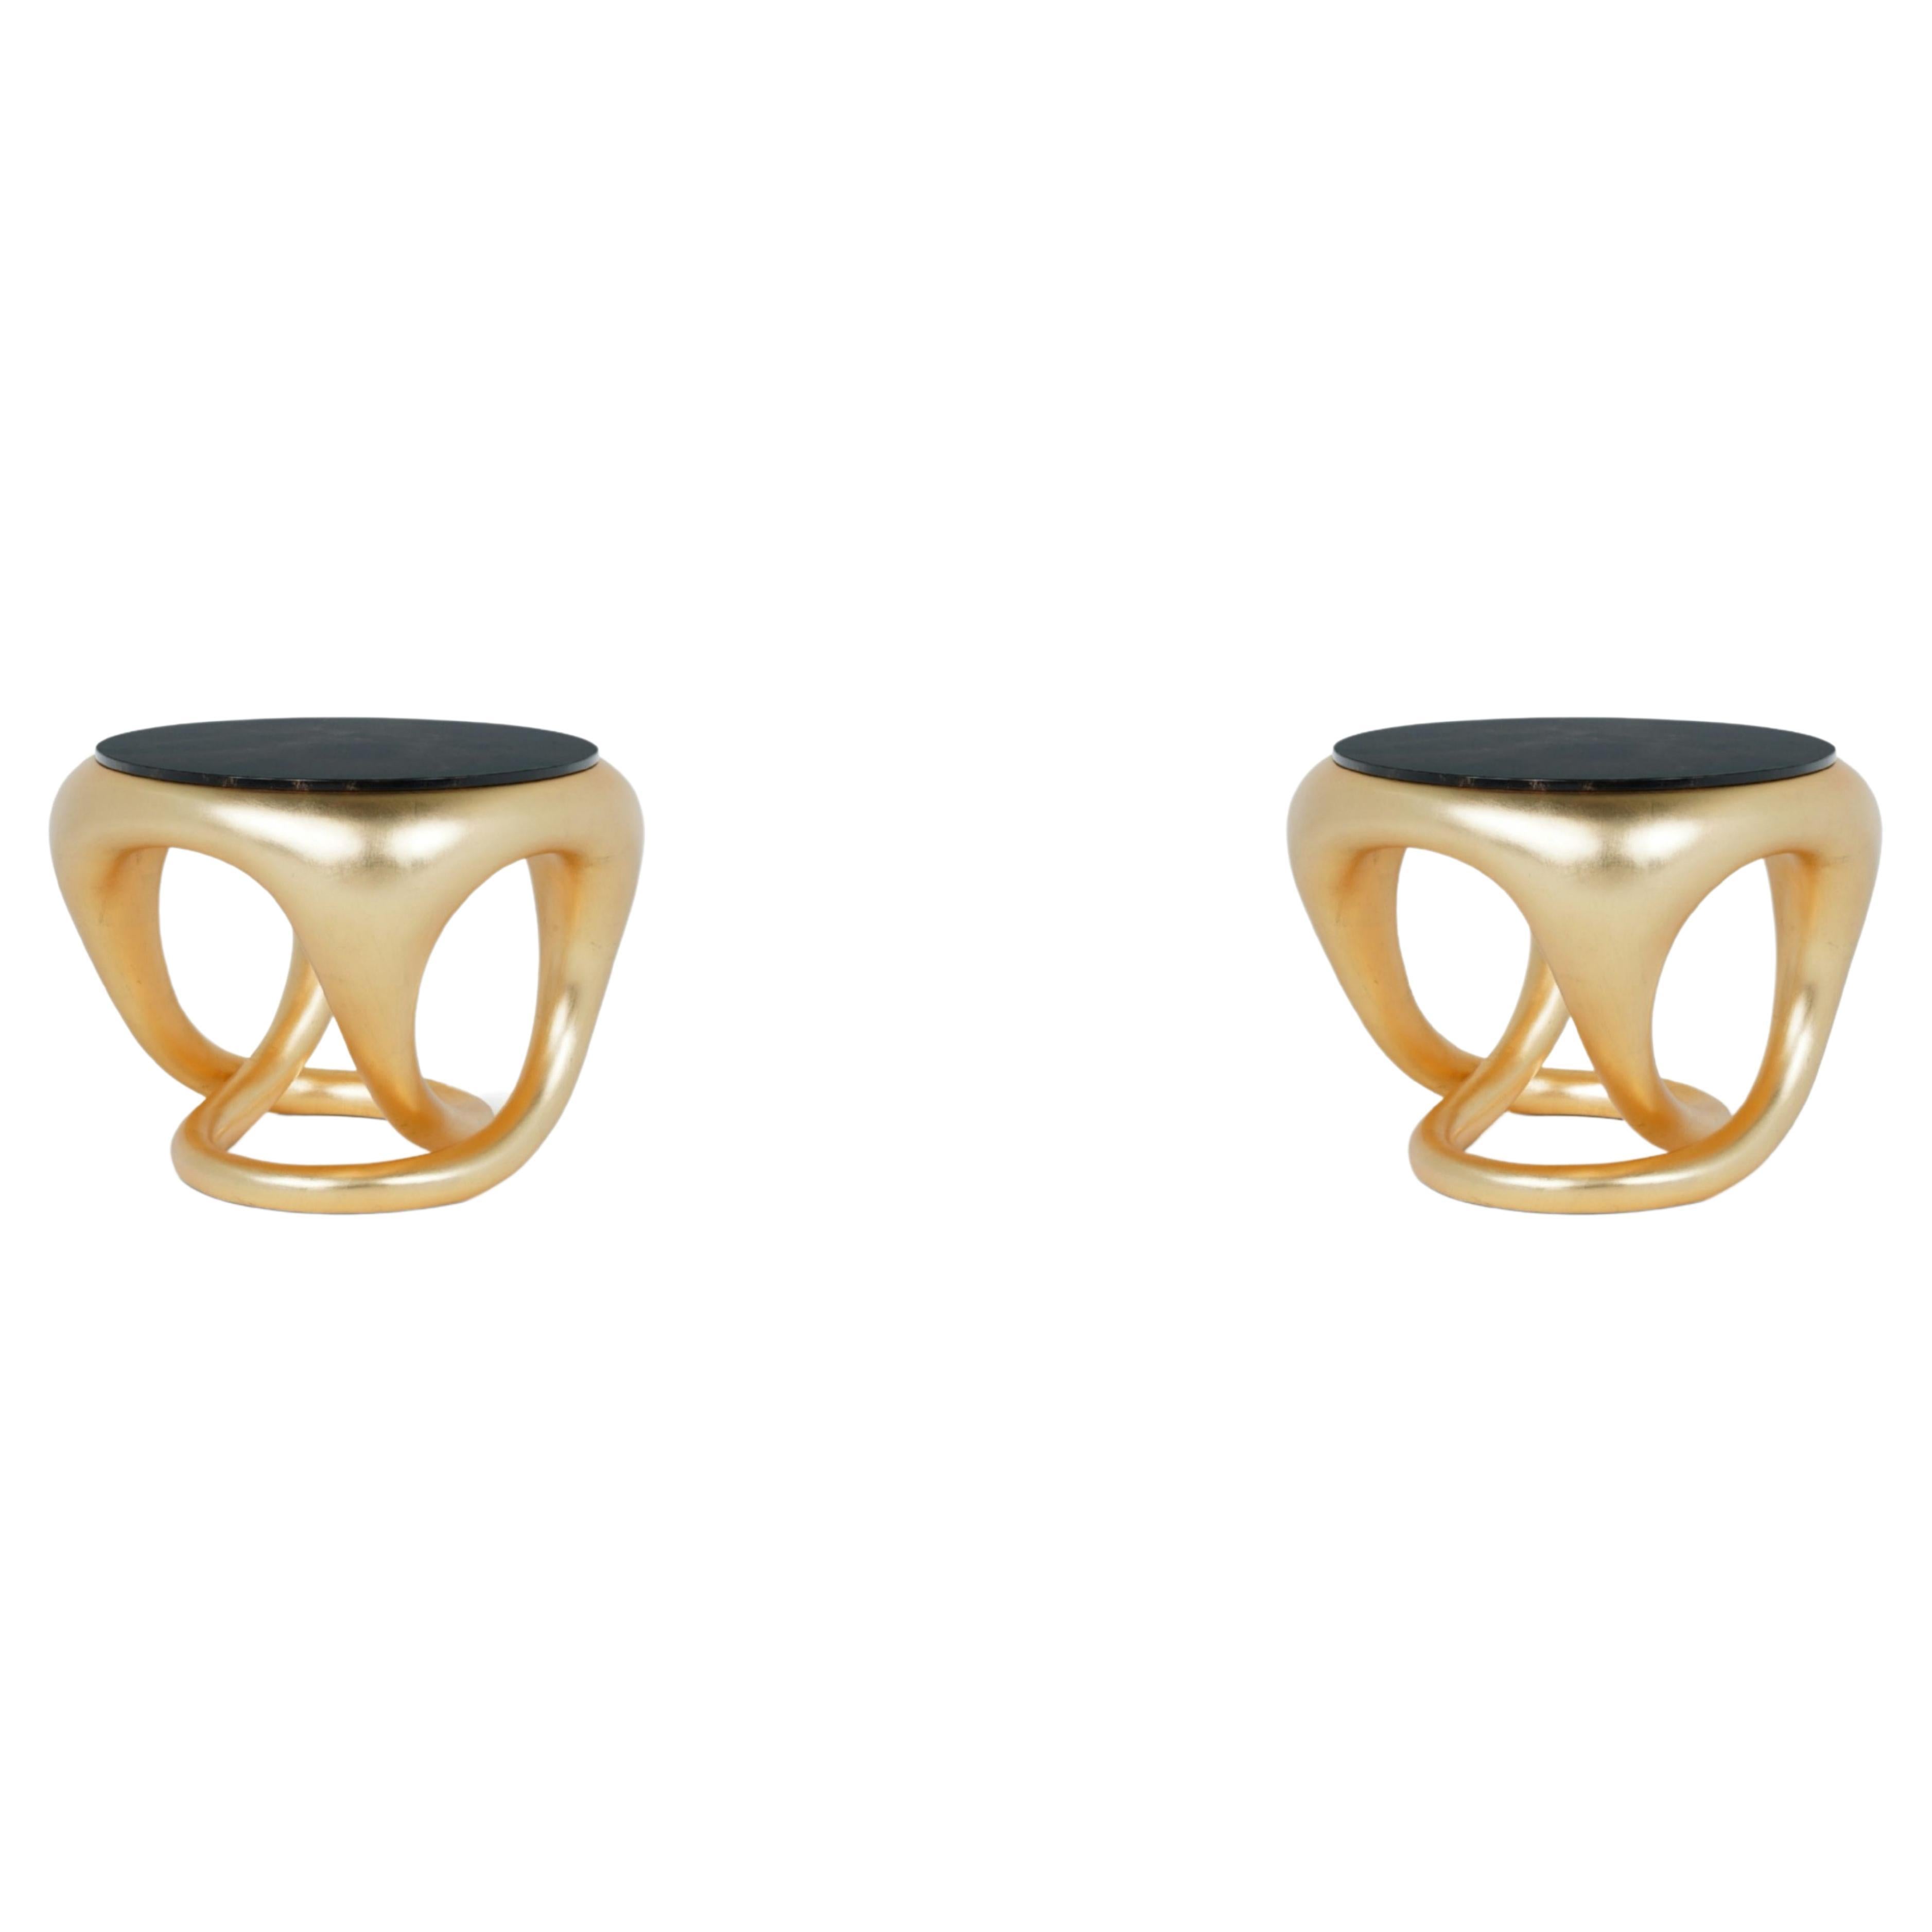 PAIR NEW DESIGN SIDE TABLE COLLECTION 2024

Marbled finish top, gold leaf base.
Dimensions:
Ø64 x 49 cm
25.2 x 19.3 in

Enjoy the poetic beauty side table with fluid lines, finished in a radiant gold leaf with a black + gold marbled finish. This